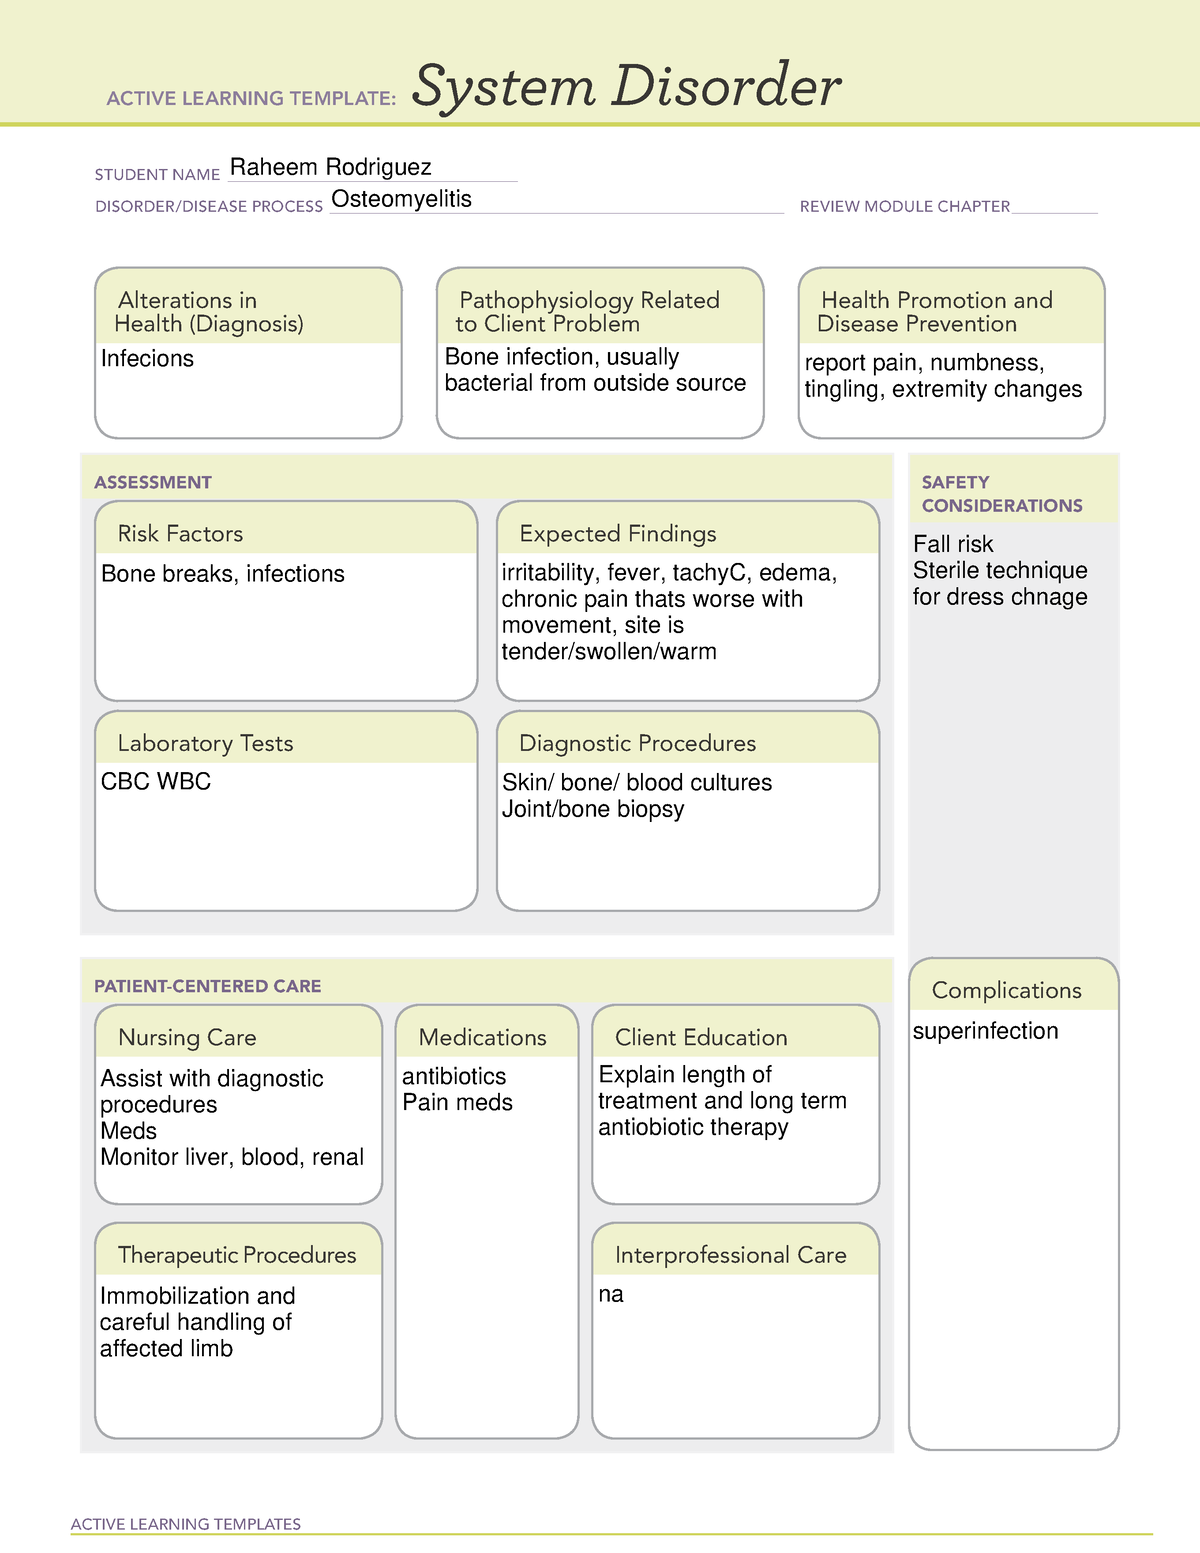 bacterial-meningitis-system-disorder-active-learning-templates-therapeutic-procedure-a